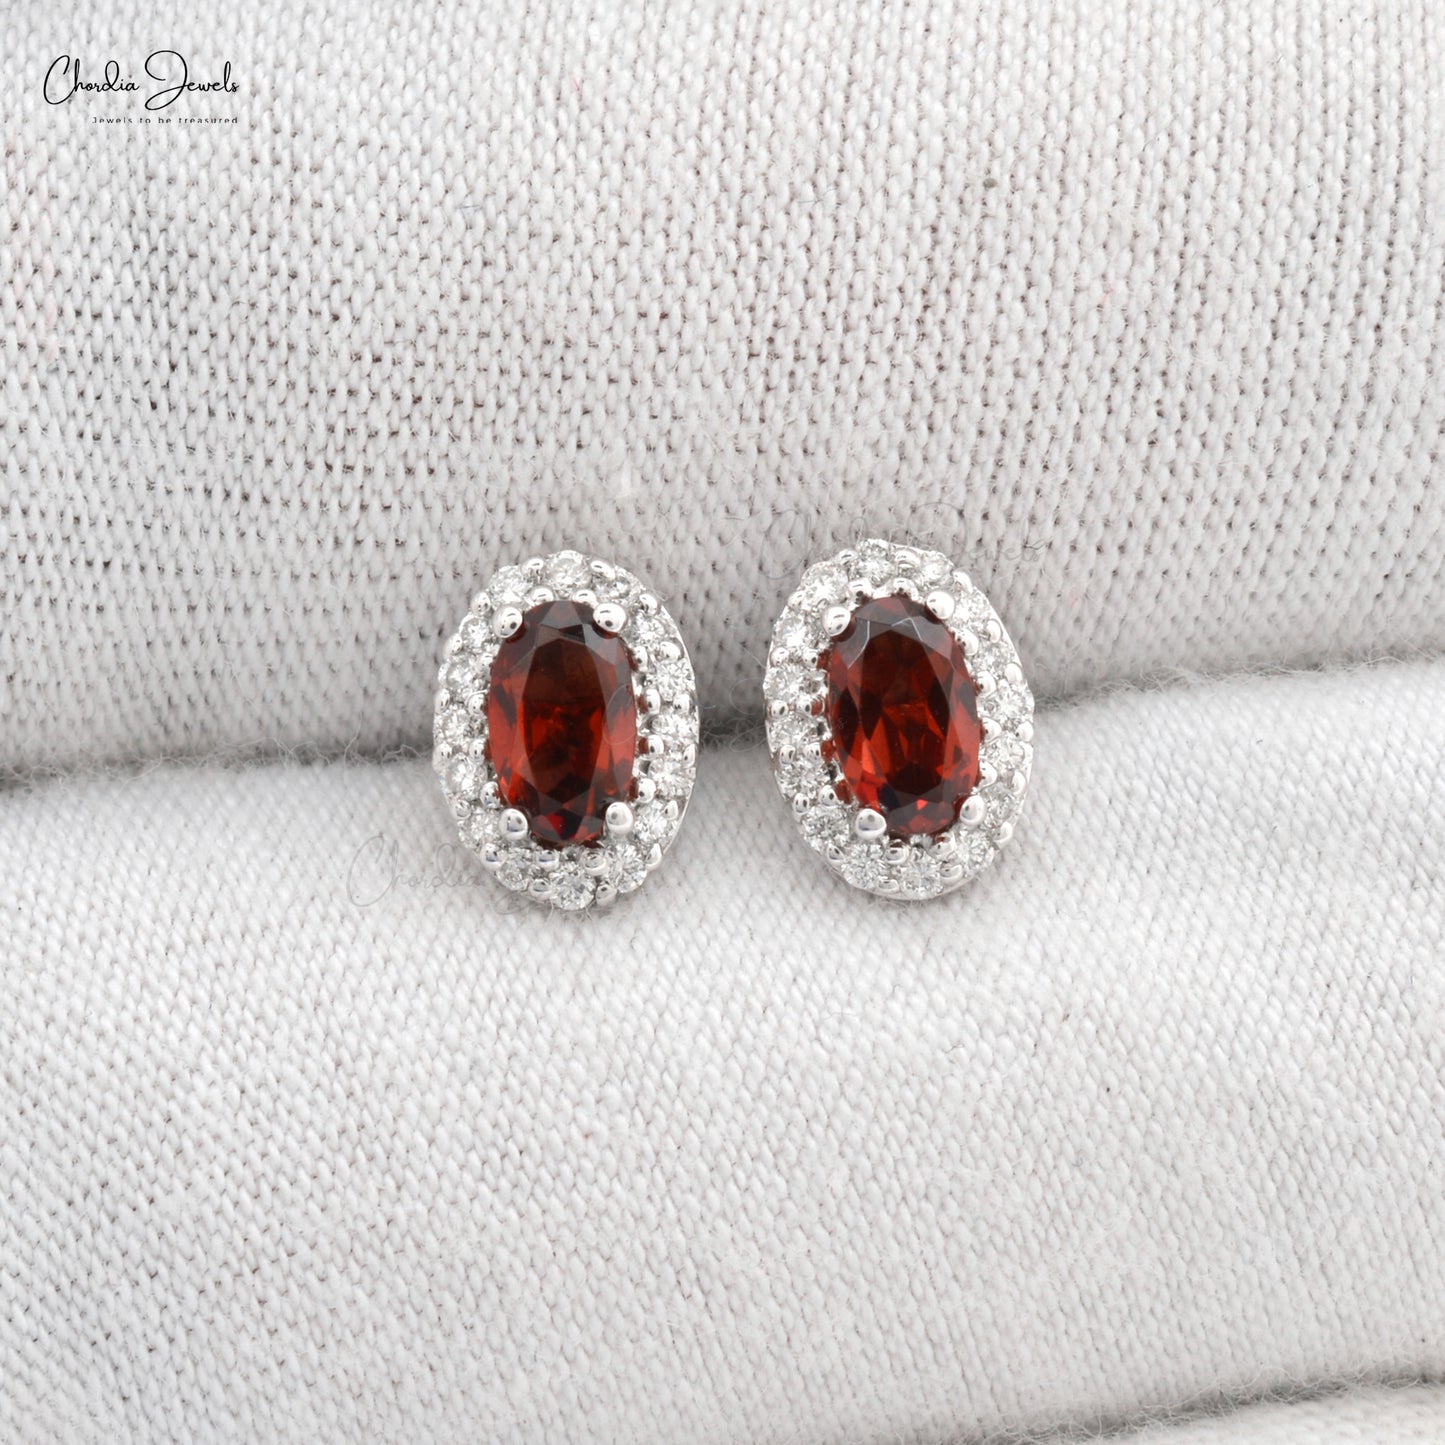 Load image into Gallery viewer, New Trendy Halo Stud Earrings Studded With Diamonds 5x3mm Oval Authentic Red Garnet Gemstone Studs in 14k Real White Gold Jewelry For Her
